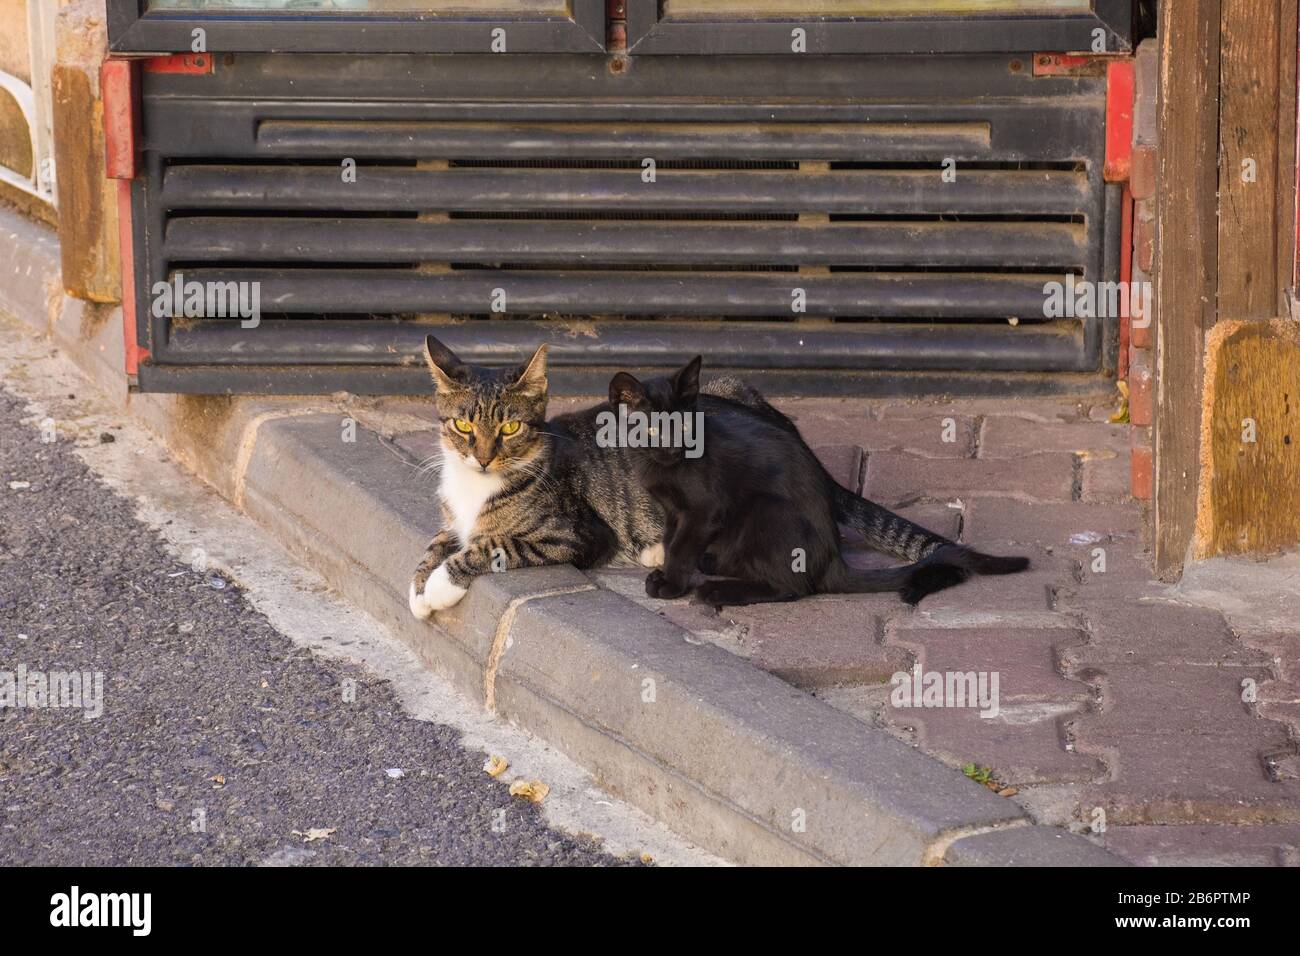 A street cat and her kitten on the island of Buyukada, one of the Prices' Islands, also known as Adalar, in the Sea of Marmara off the coast of Istanb Stock Photo